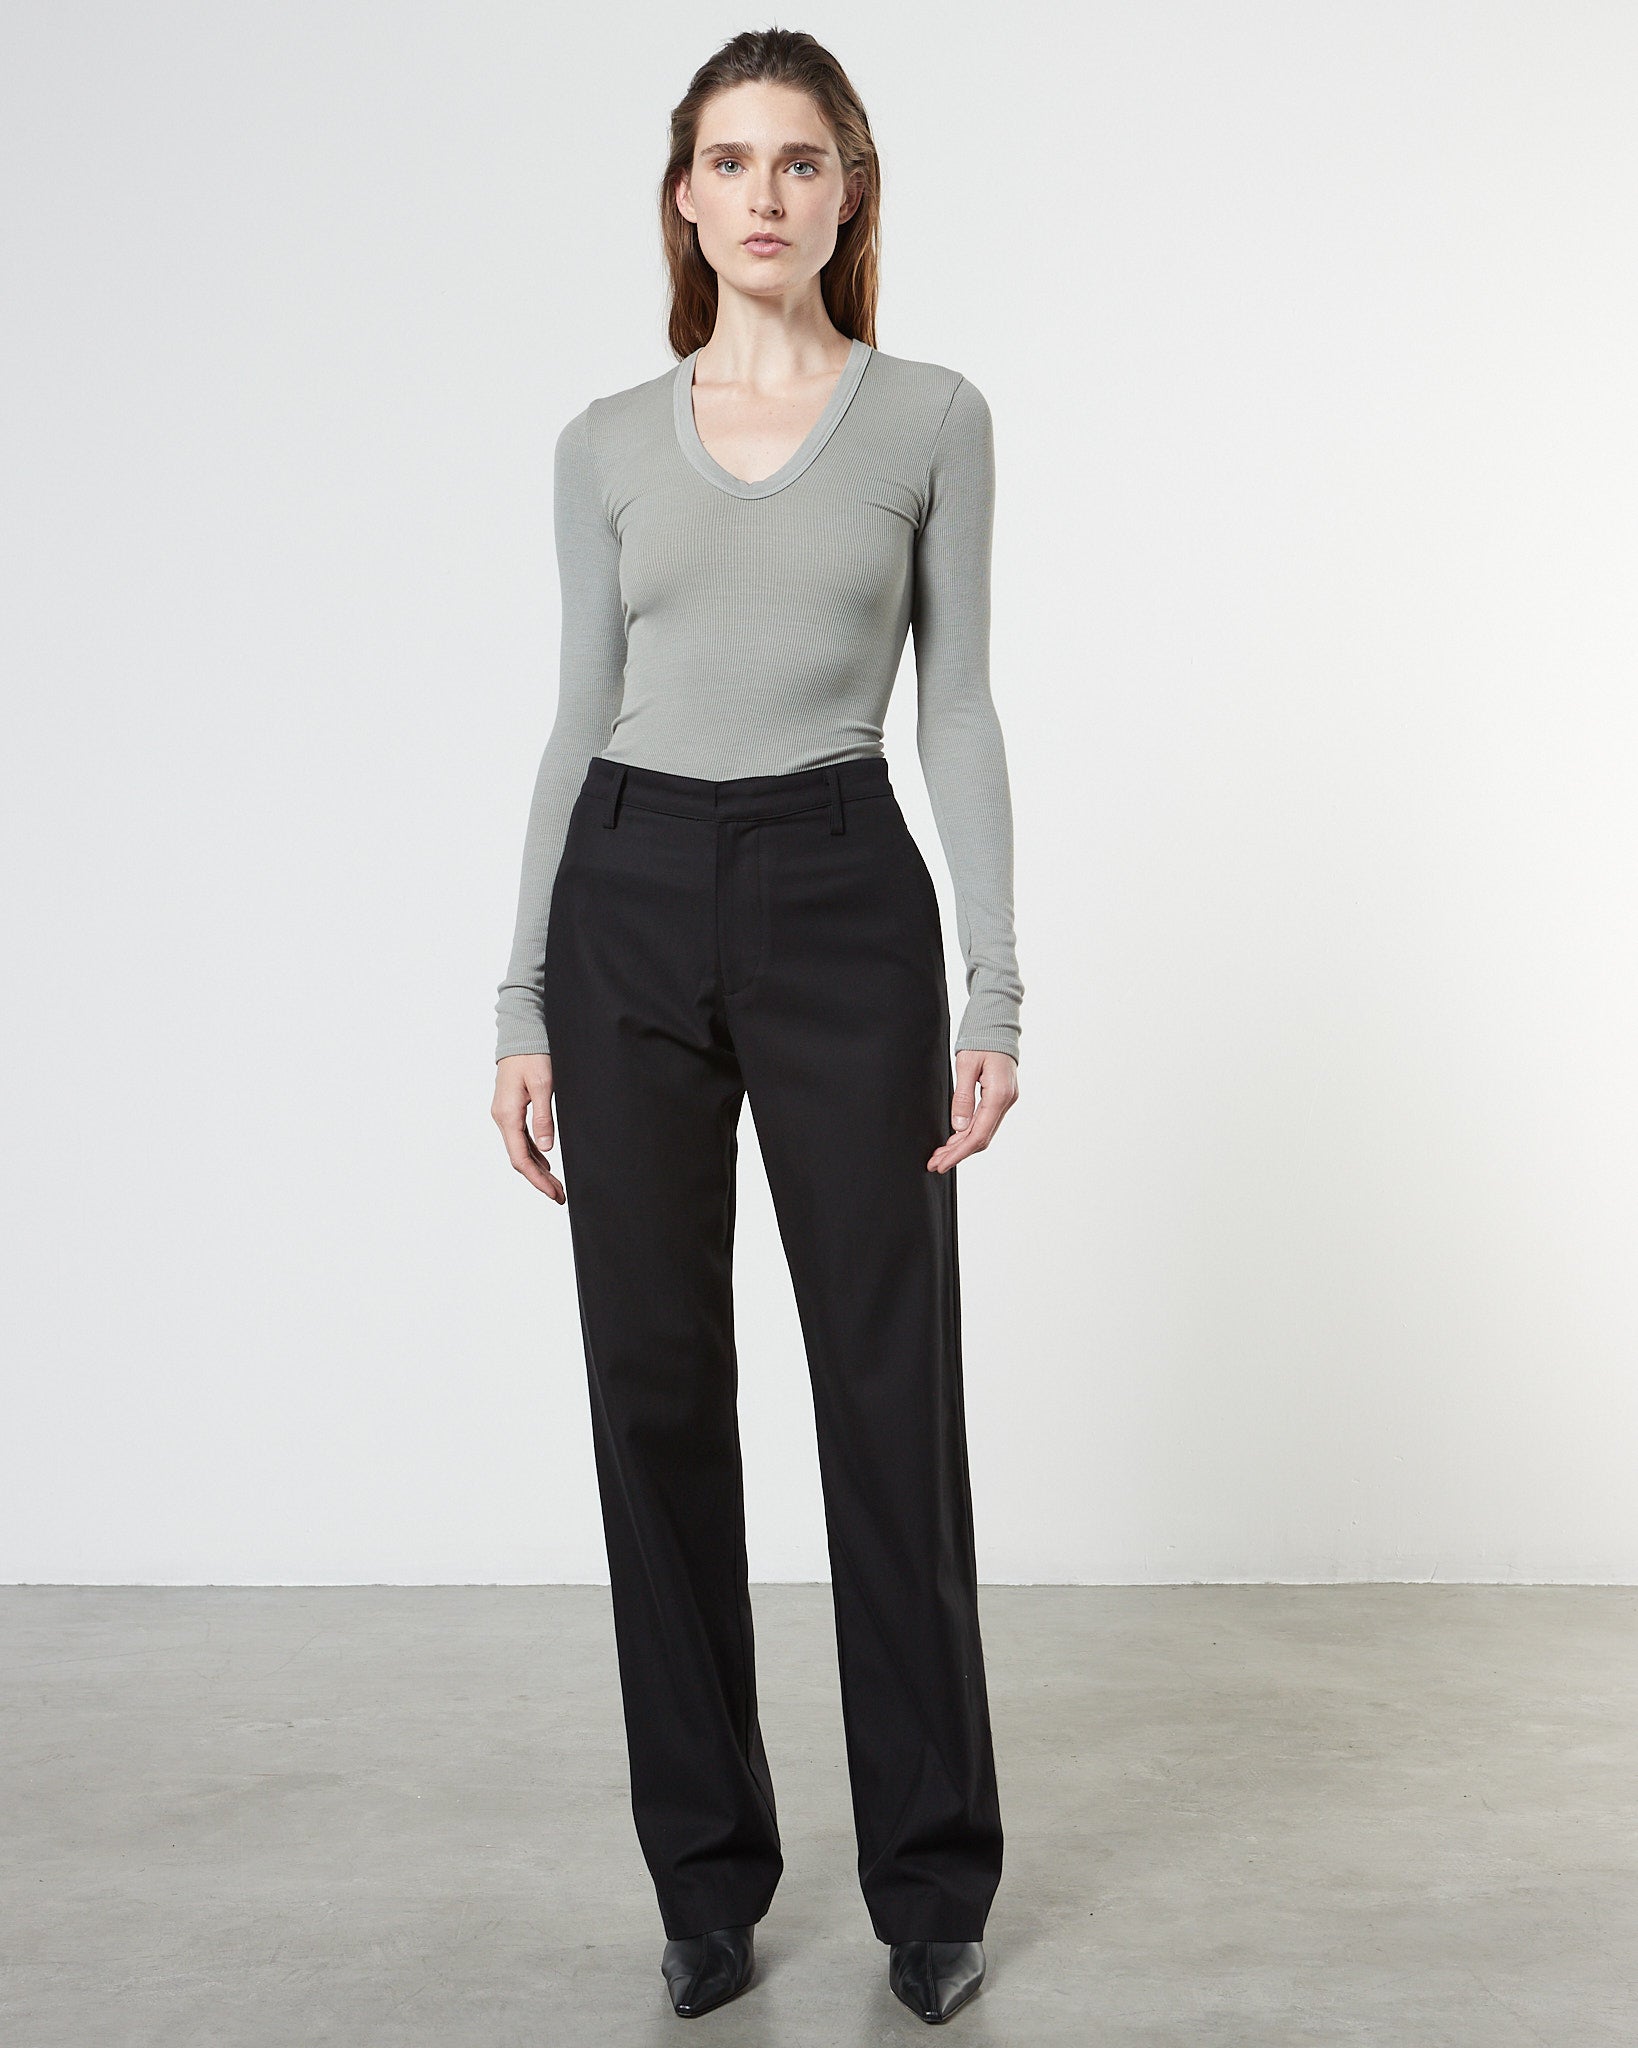 ENZA COSTA FW23 COLLECTION IMAGE